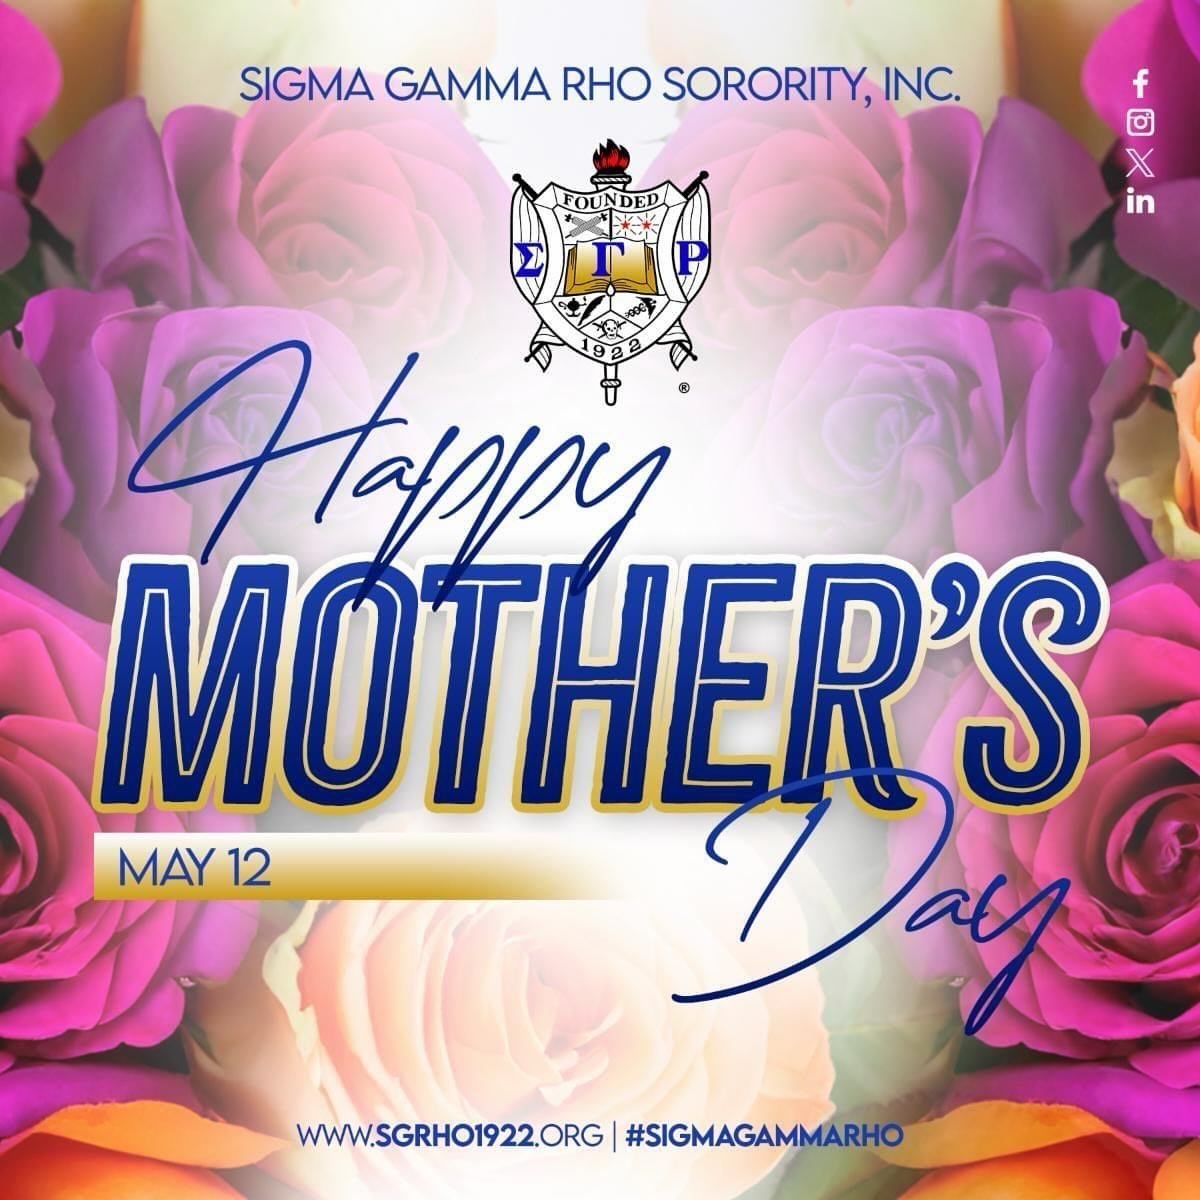 Happy Mother&rsquo;s Day from the Greater Women of Sigma Gamma Rho Sorority, Incorporated. 

Thank you for the work that you do to make your children #GREATER !

#SigmaGammaRho #MothersDay #GreaterWomenGreaterWorld